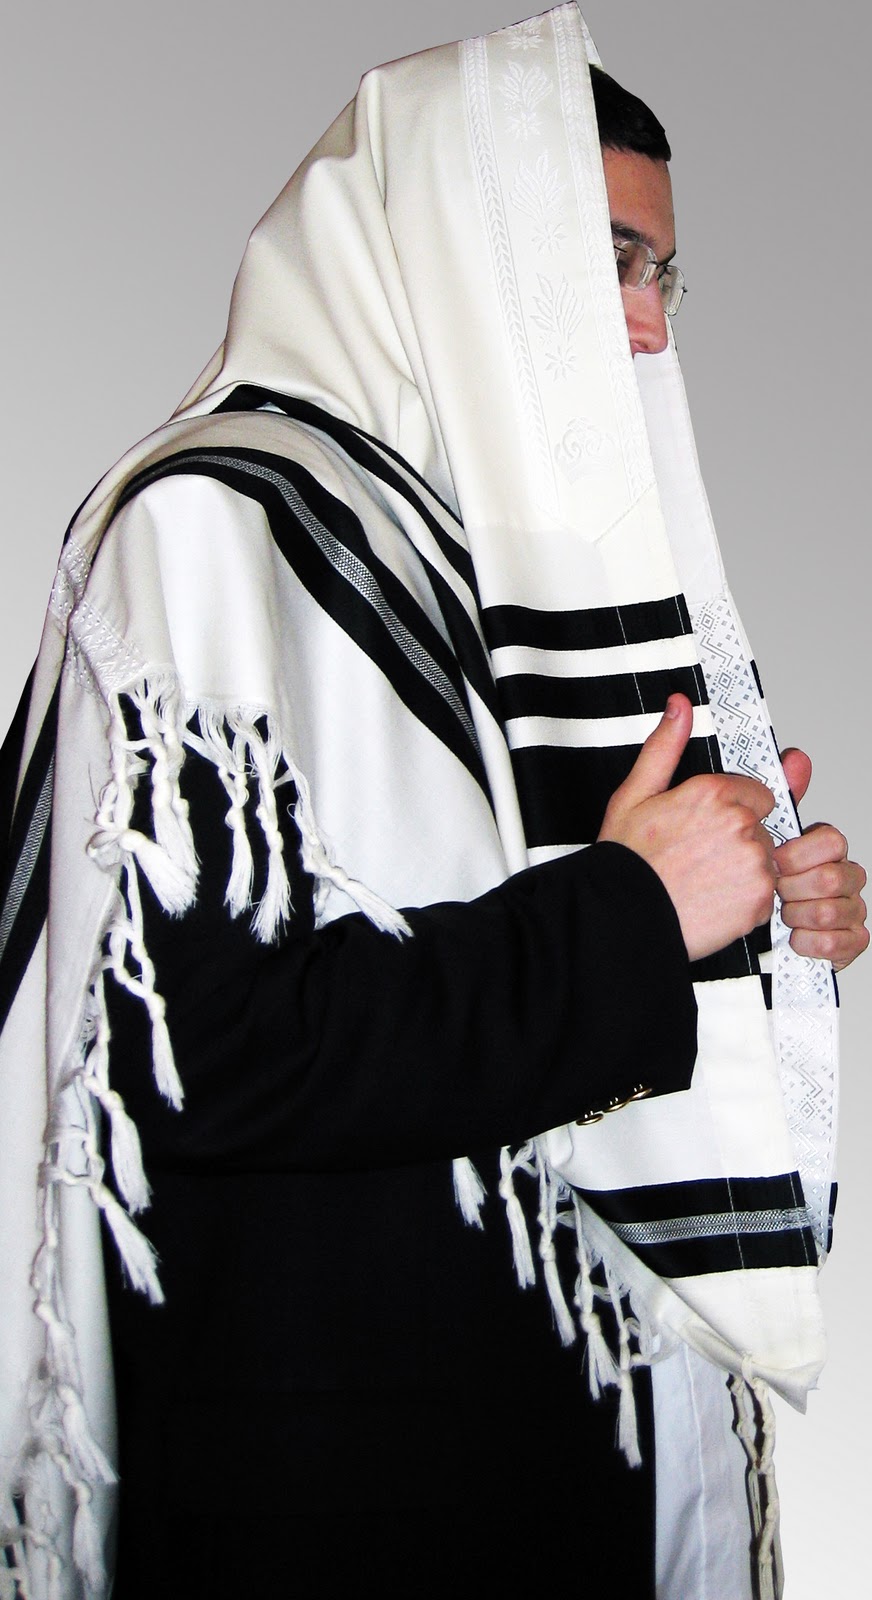 RODG3R: The Only Man in the Room Without a Tallit